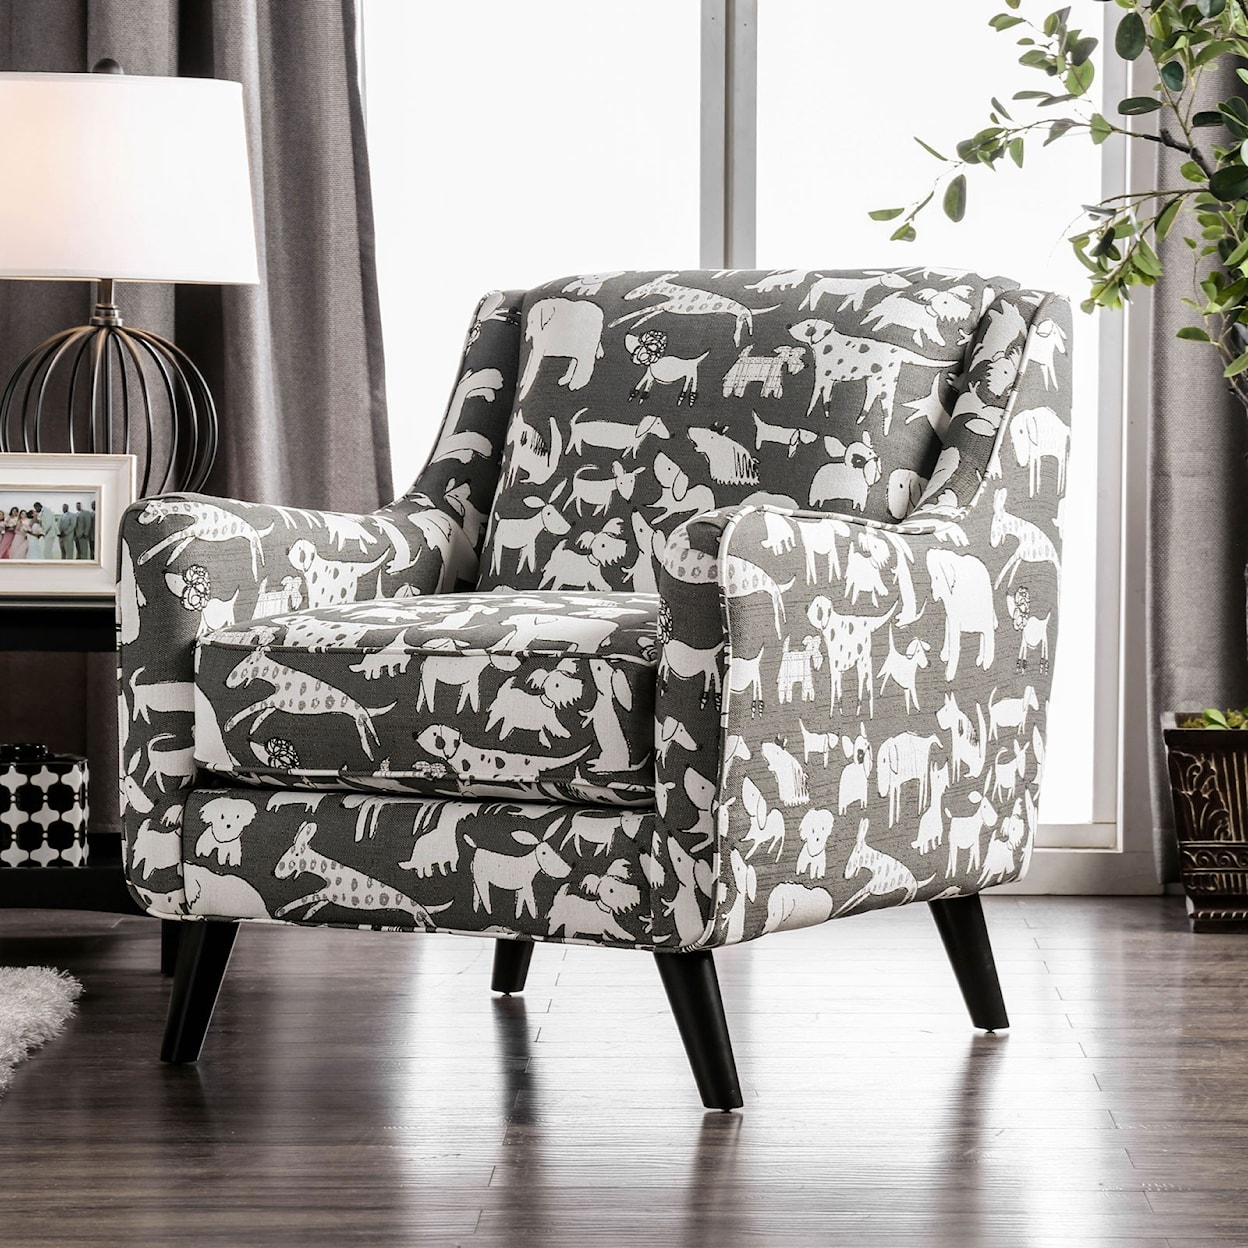 Furniture of America Patricia Animal Pattern Chair